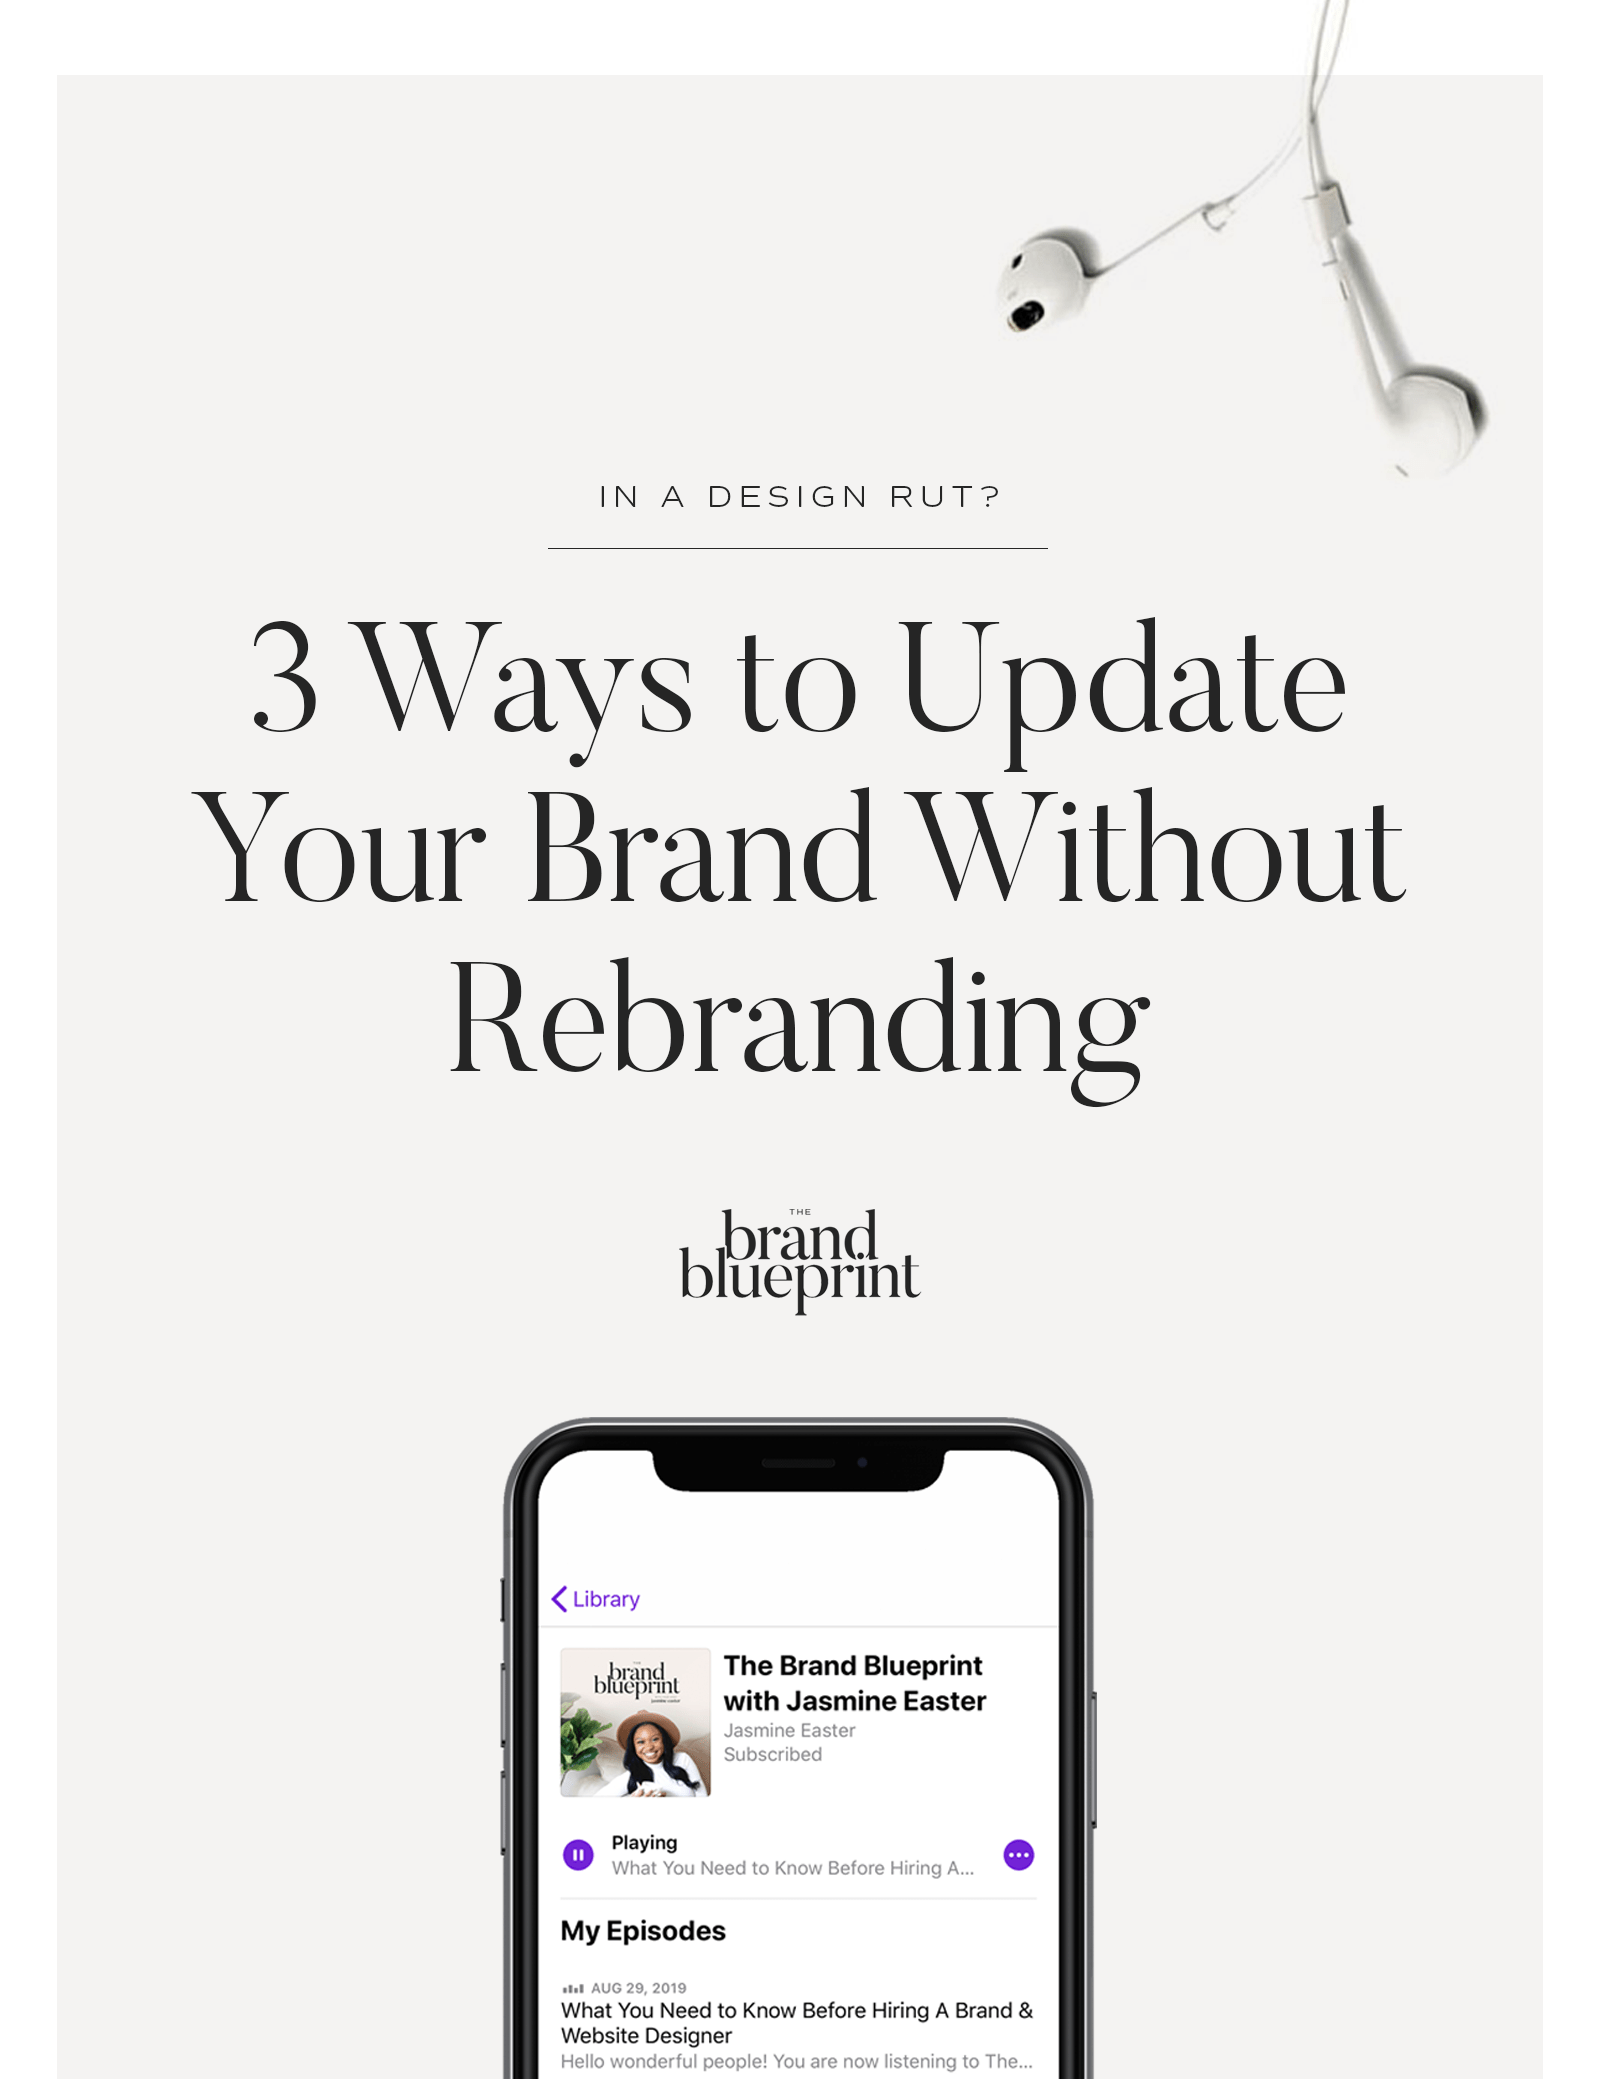 In A Design Rut? 3 Ways to Update Your Brand Without Rebranding